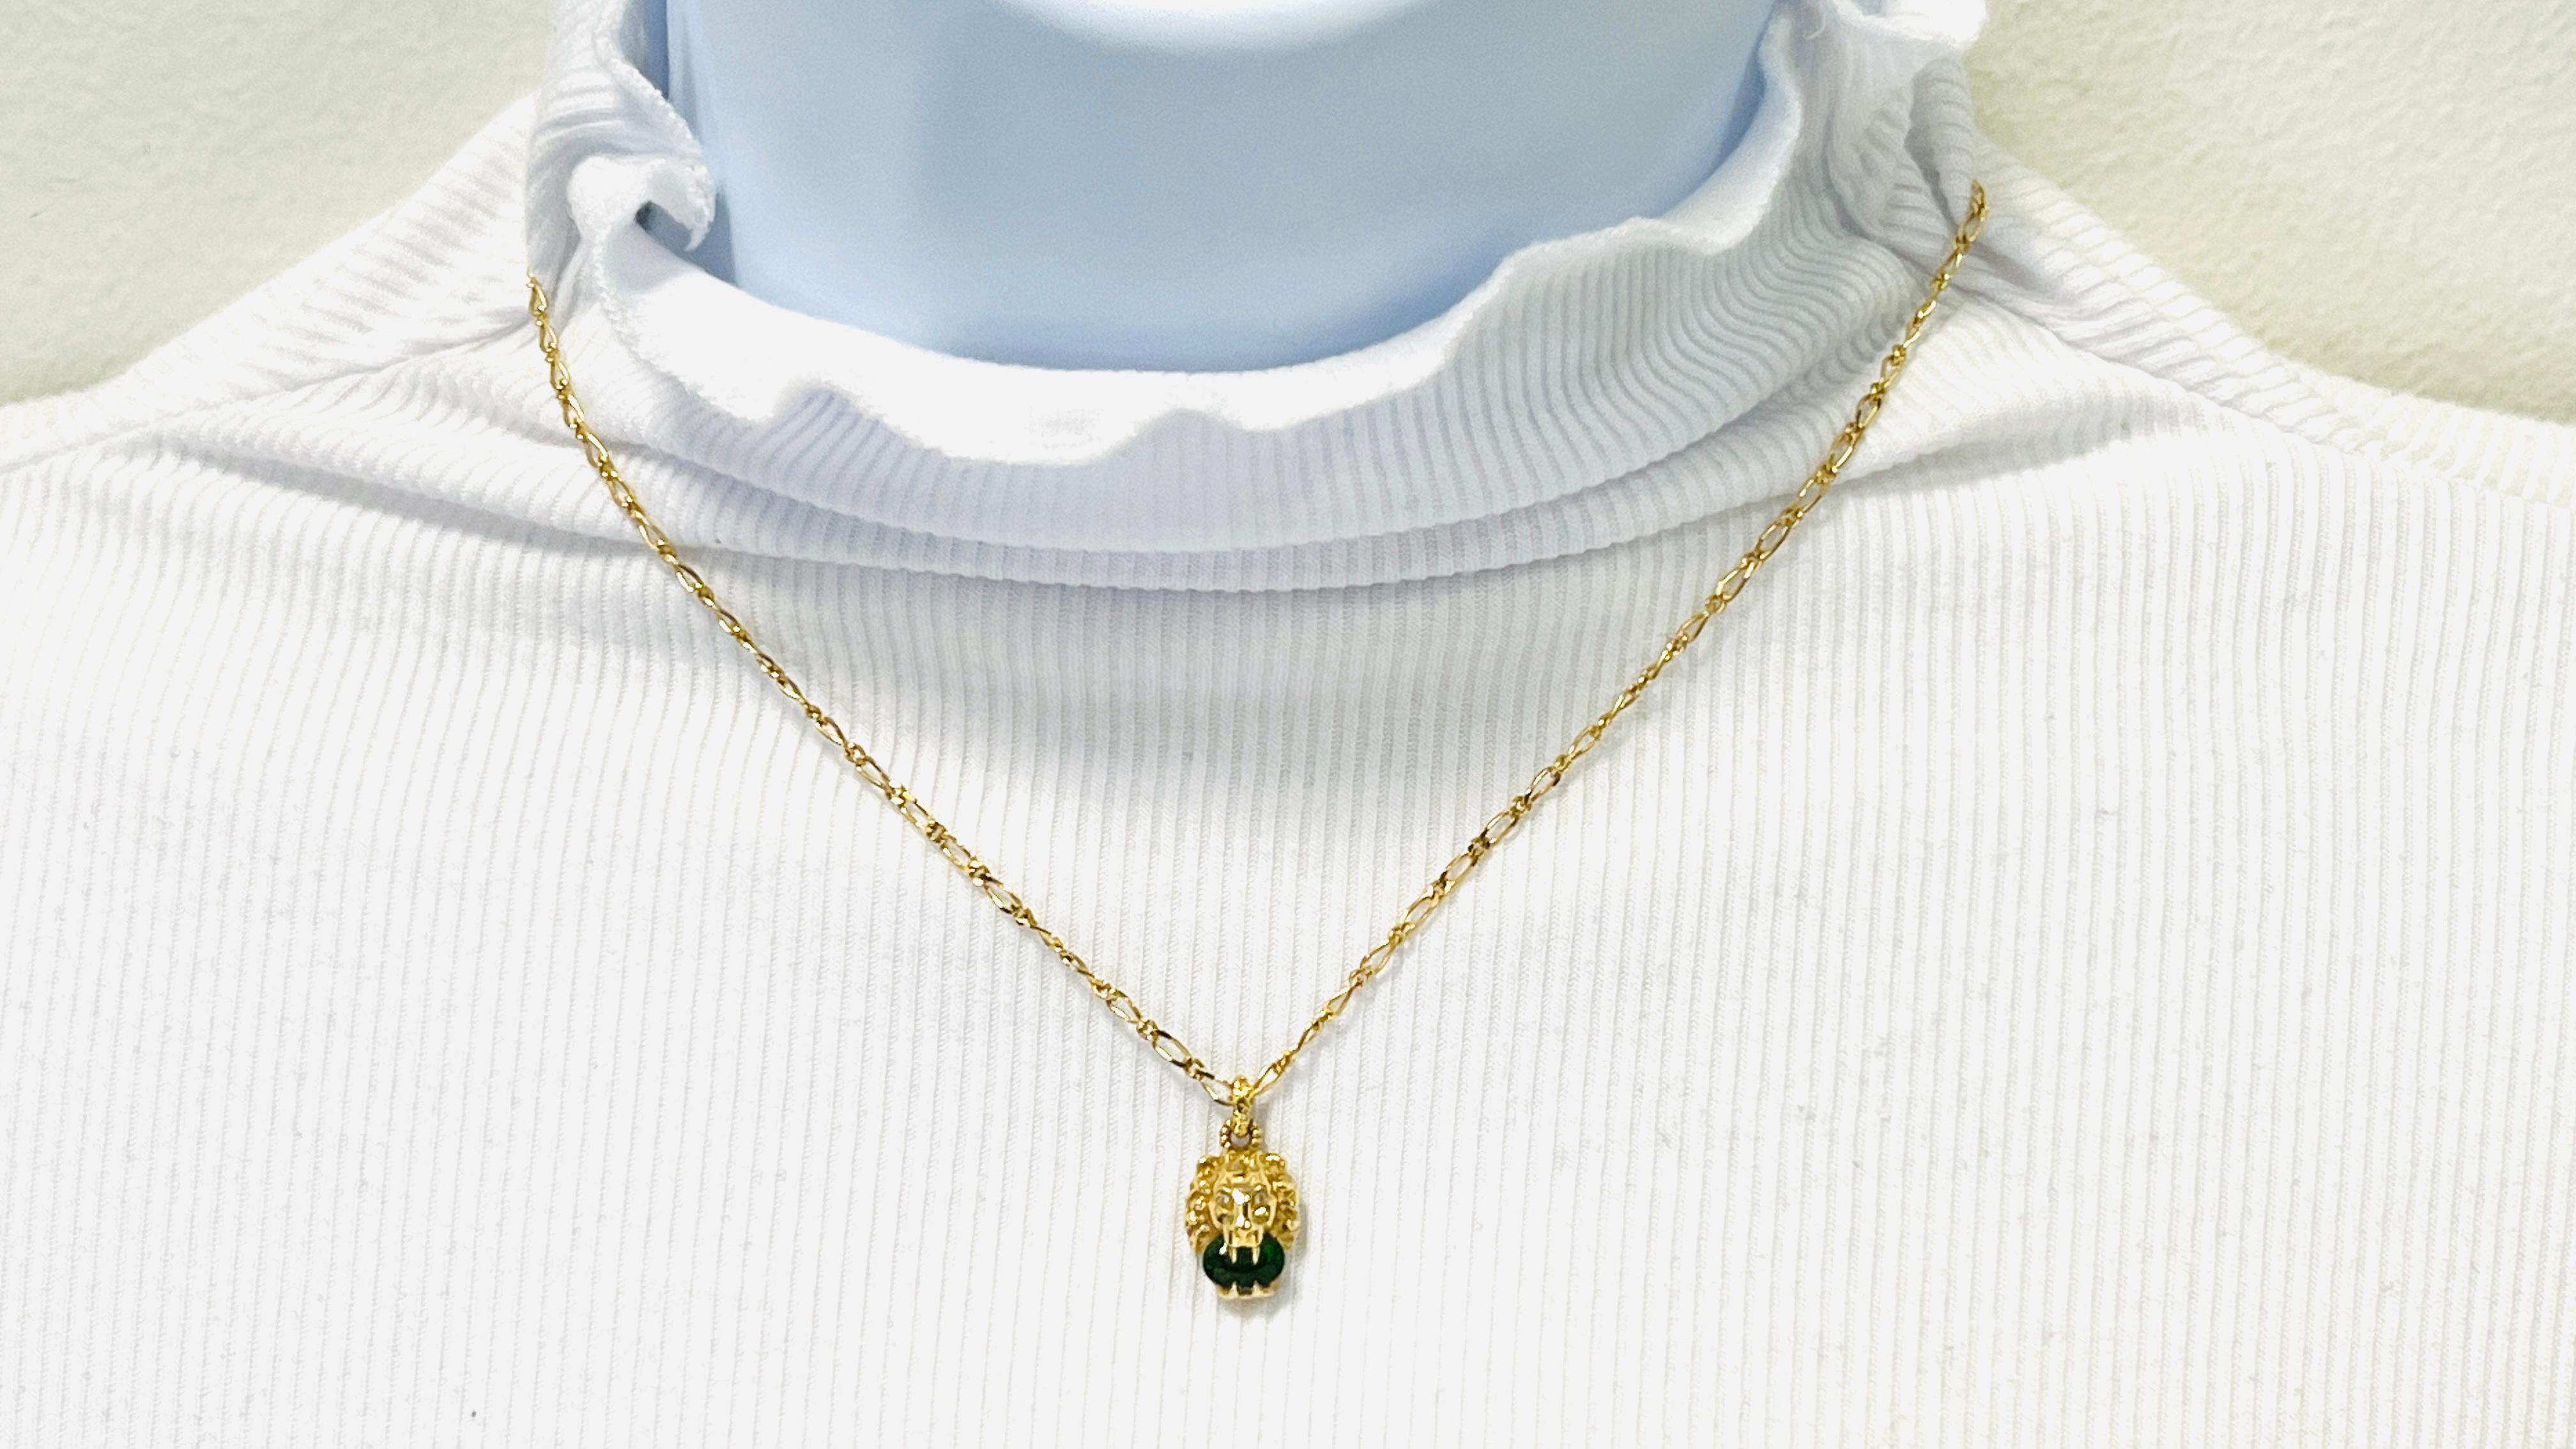 Beautiful estate Gucci necklace and earrings set made out of 18k yellow gold.  The design is of a lion's head holding a green gemstone.  Length of necklace is 16